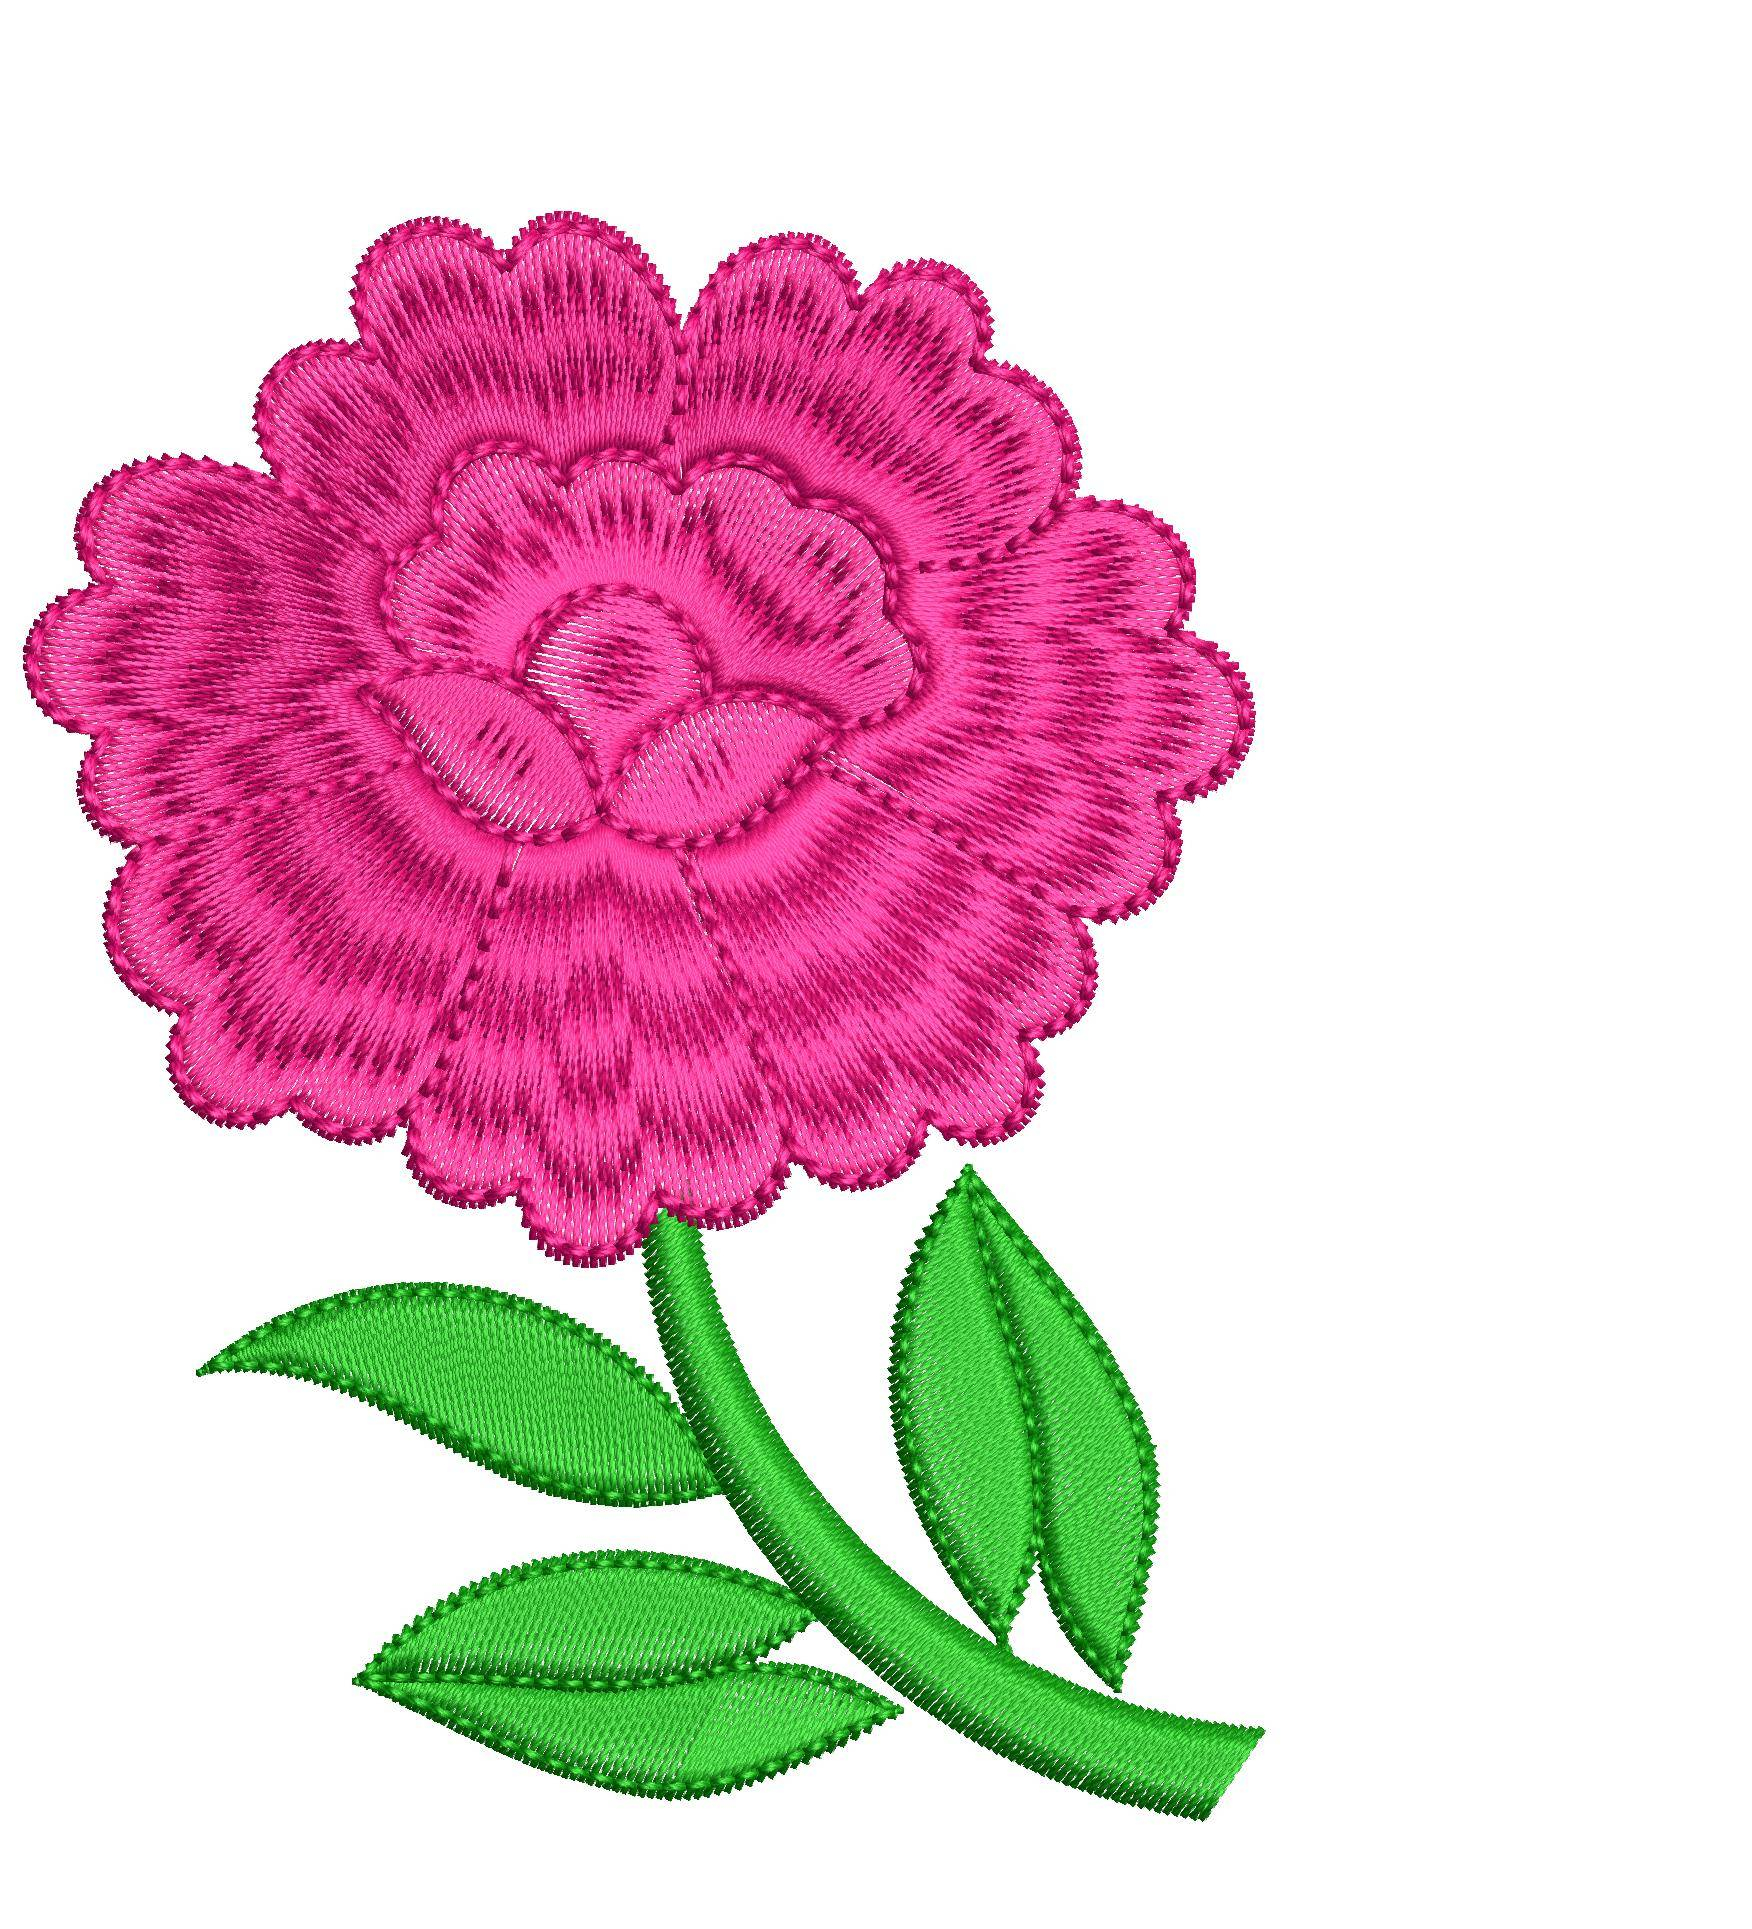 Rose Embroidery Pattern Beautiful Rose Embroidery Design